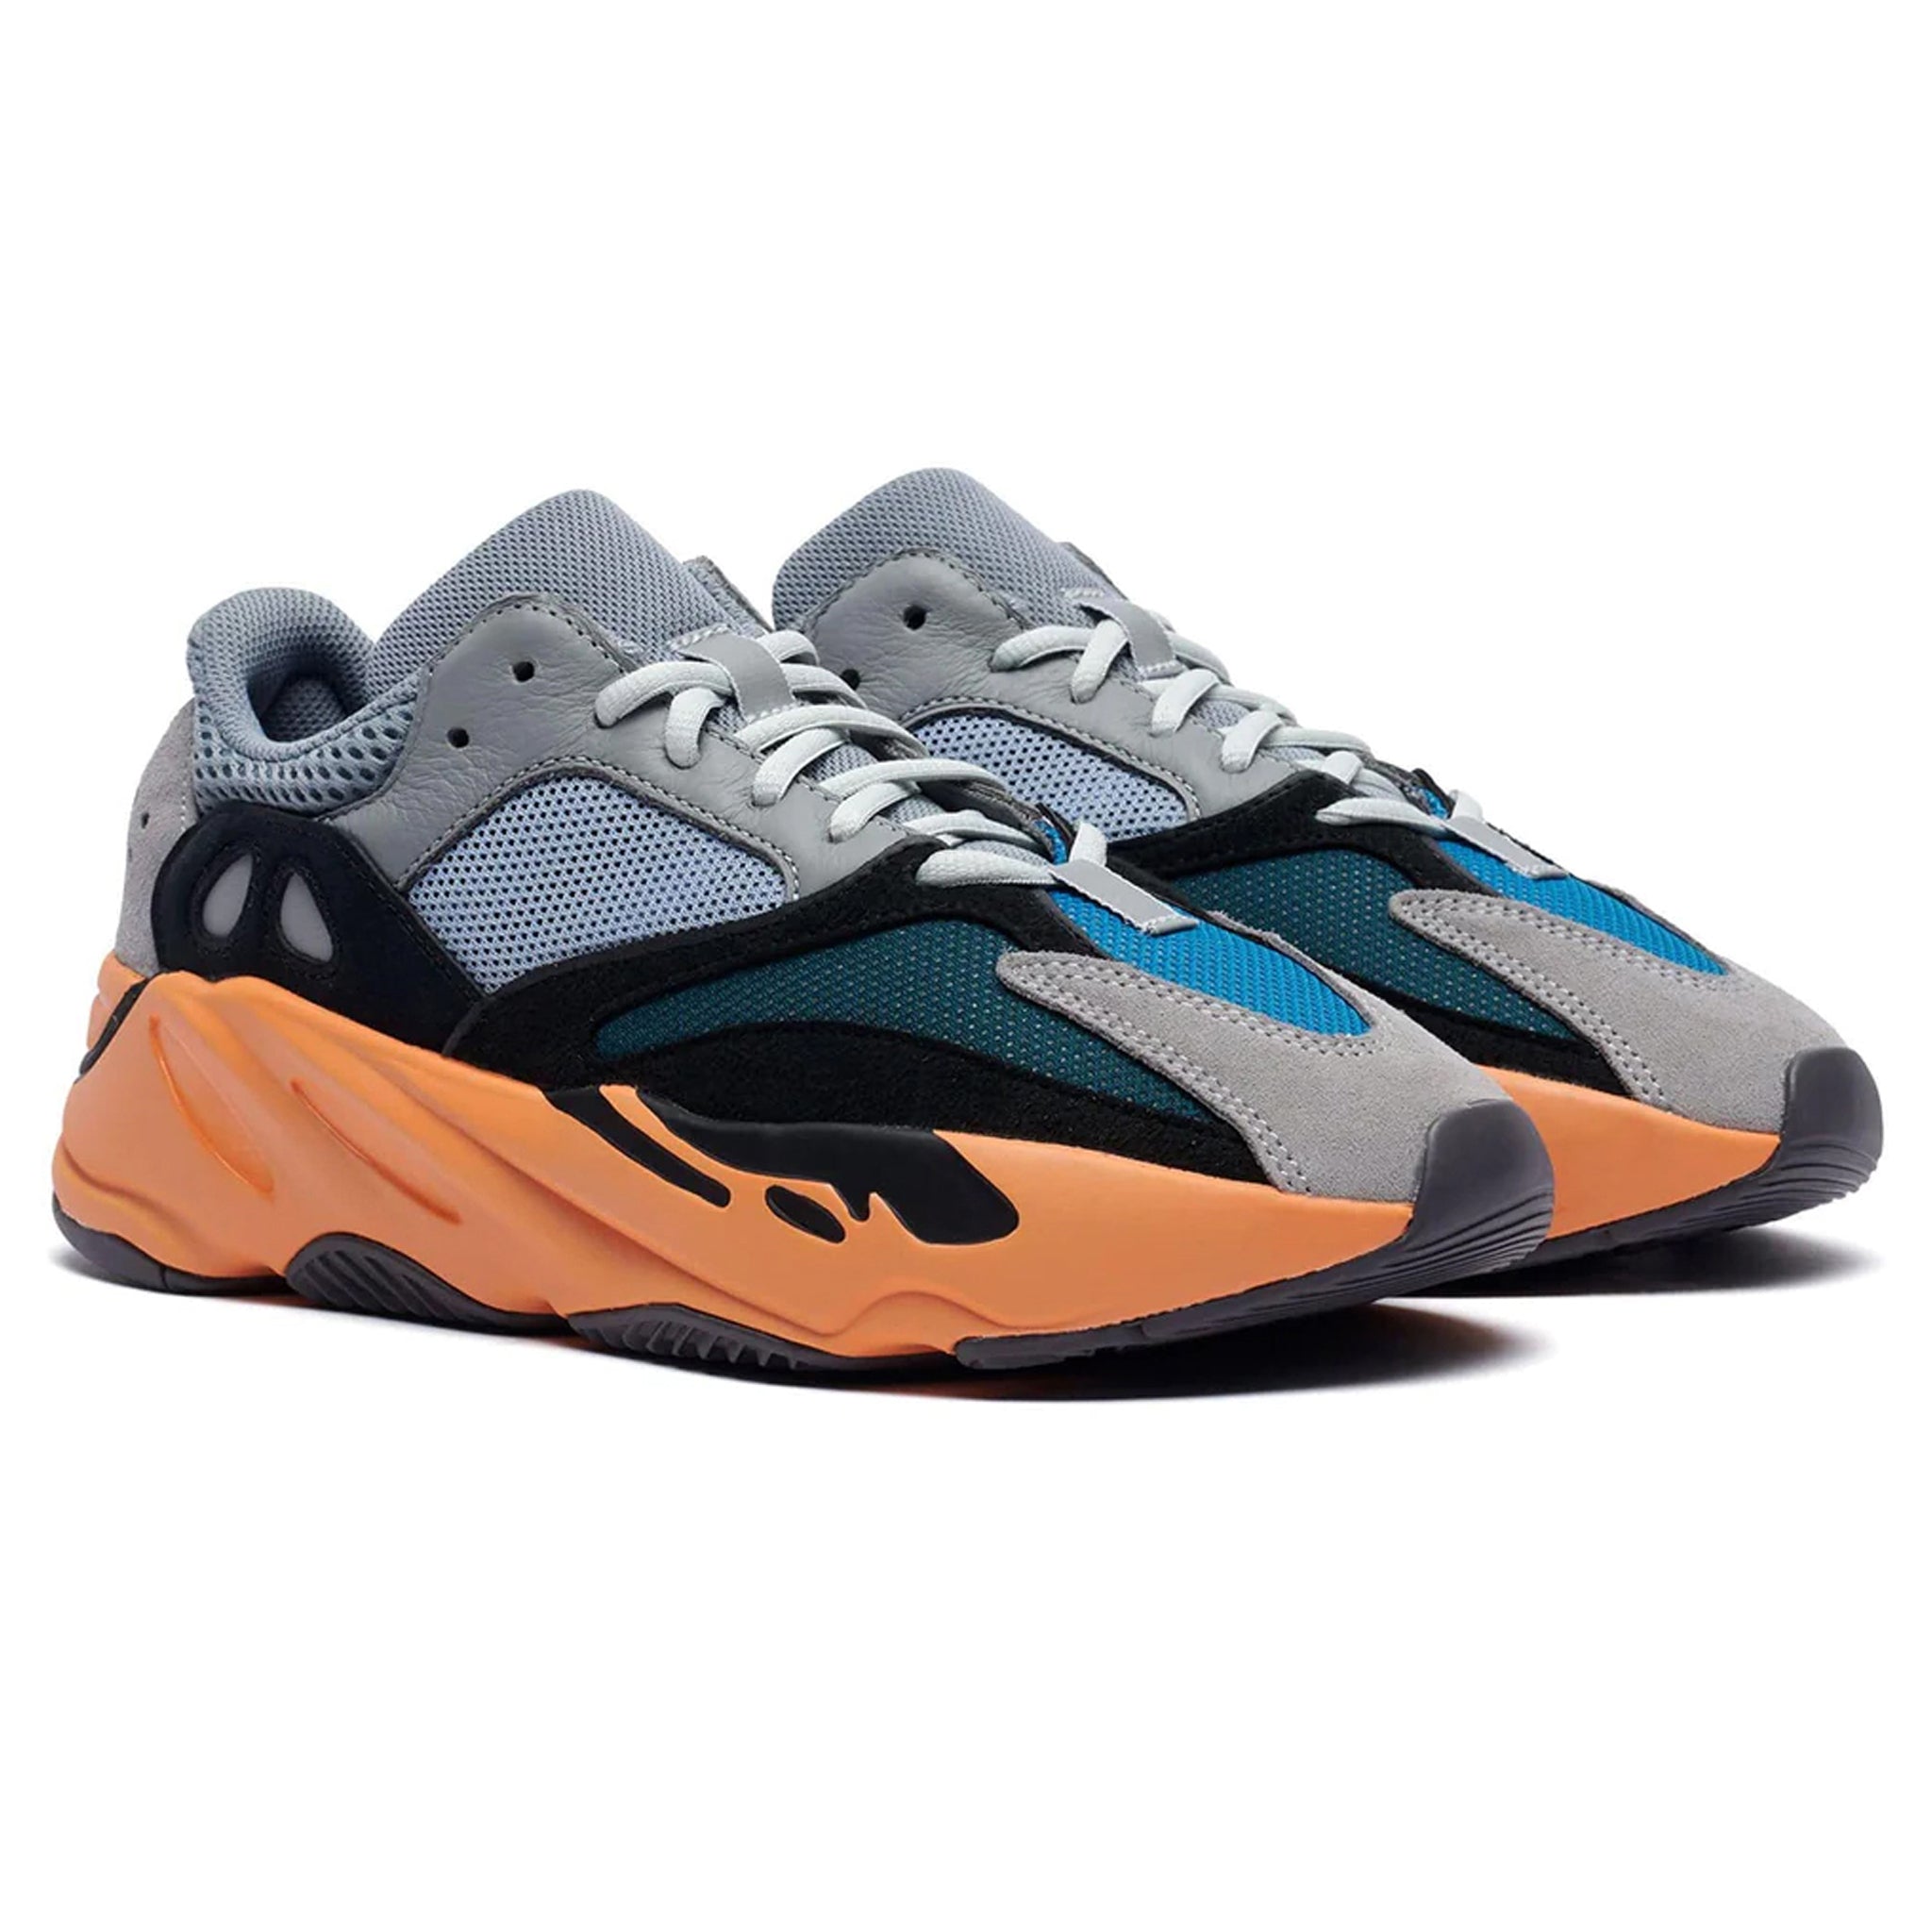 Front side view of Adidas Yeezy Boost 700 Boost Wash Orange GW0296